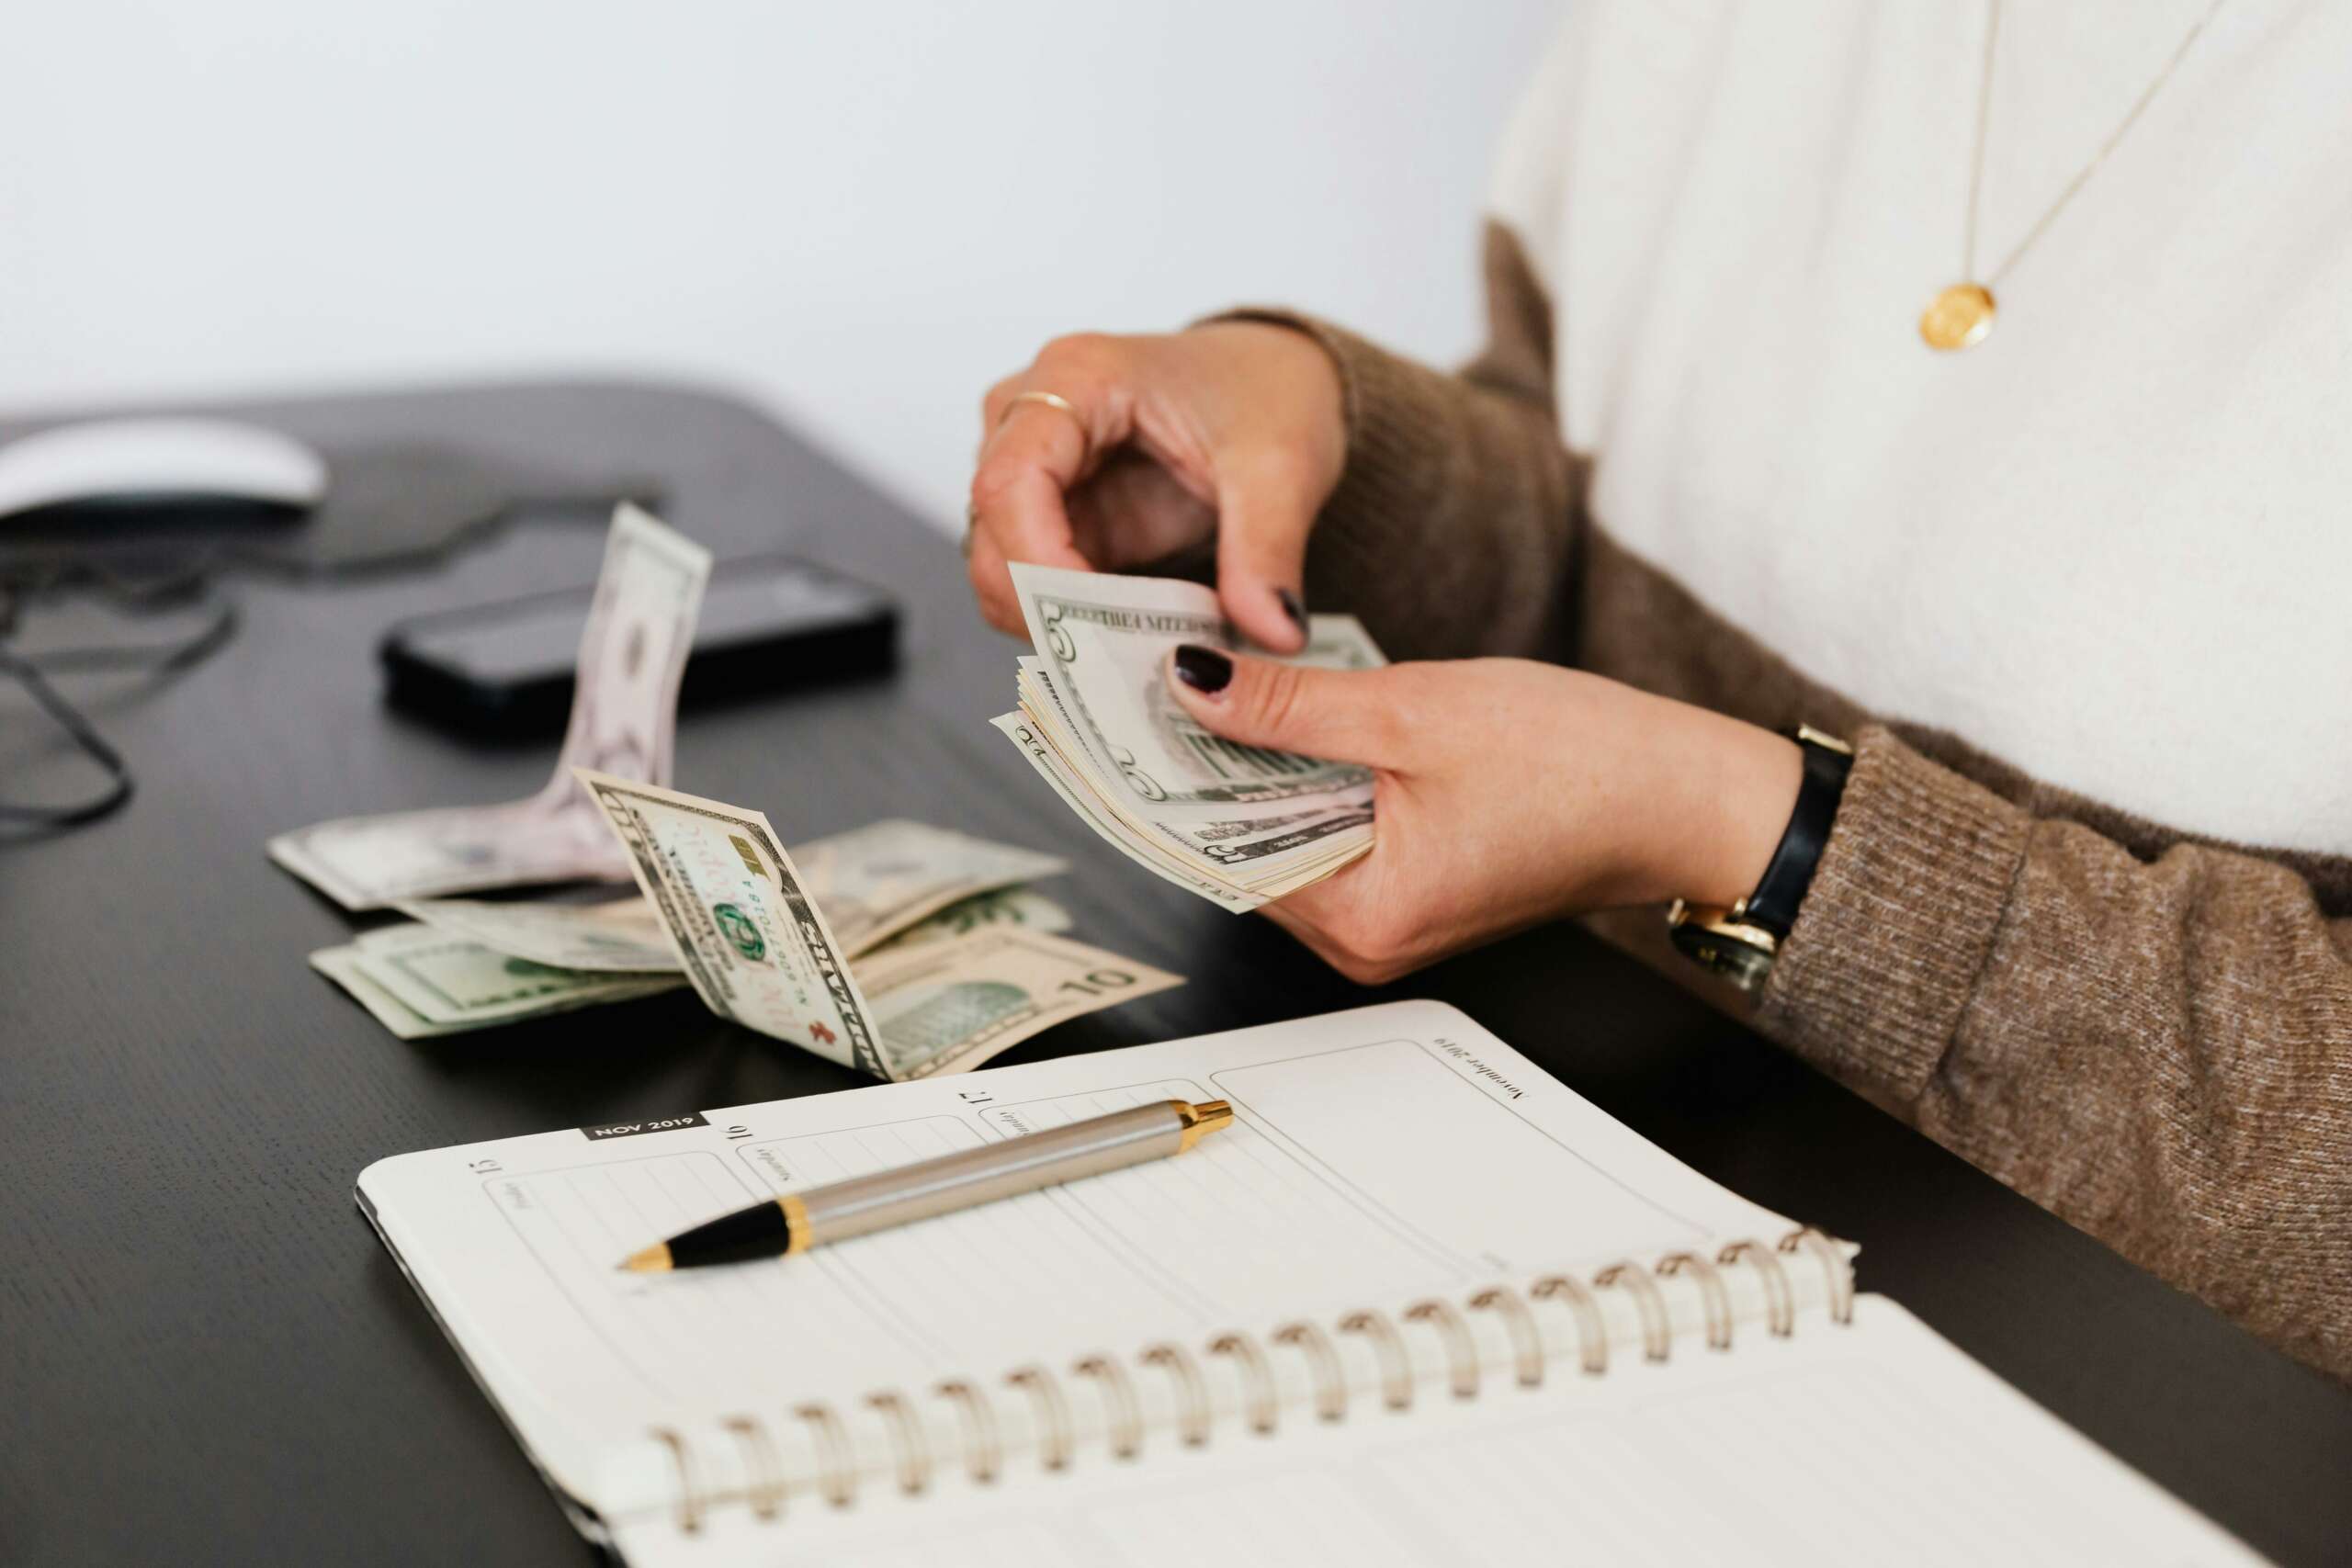 5 Helpful Tips for Mindful Money Management